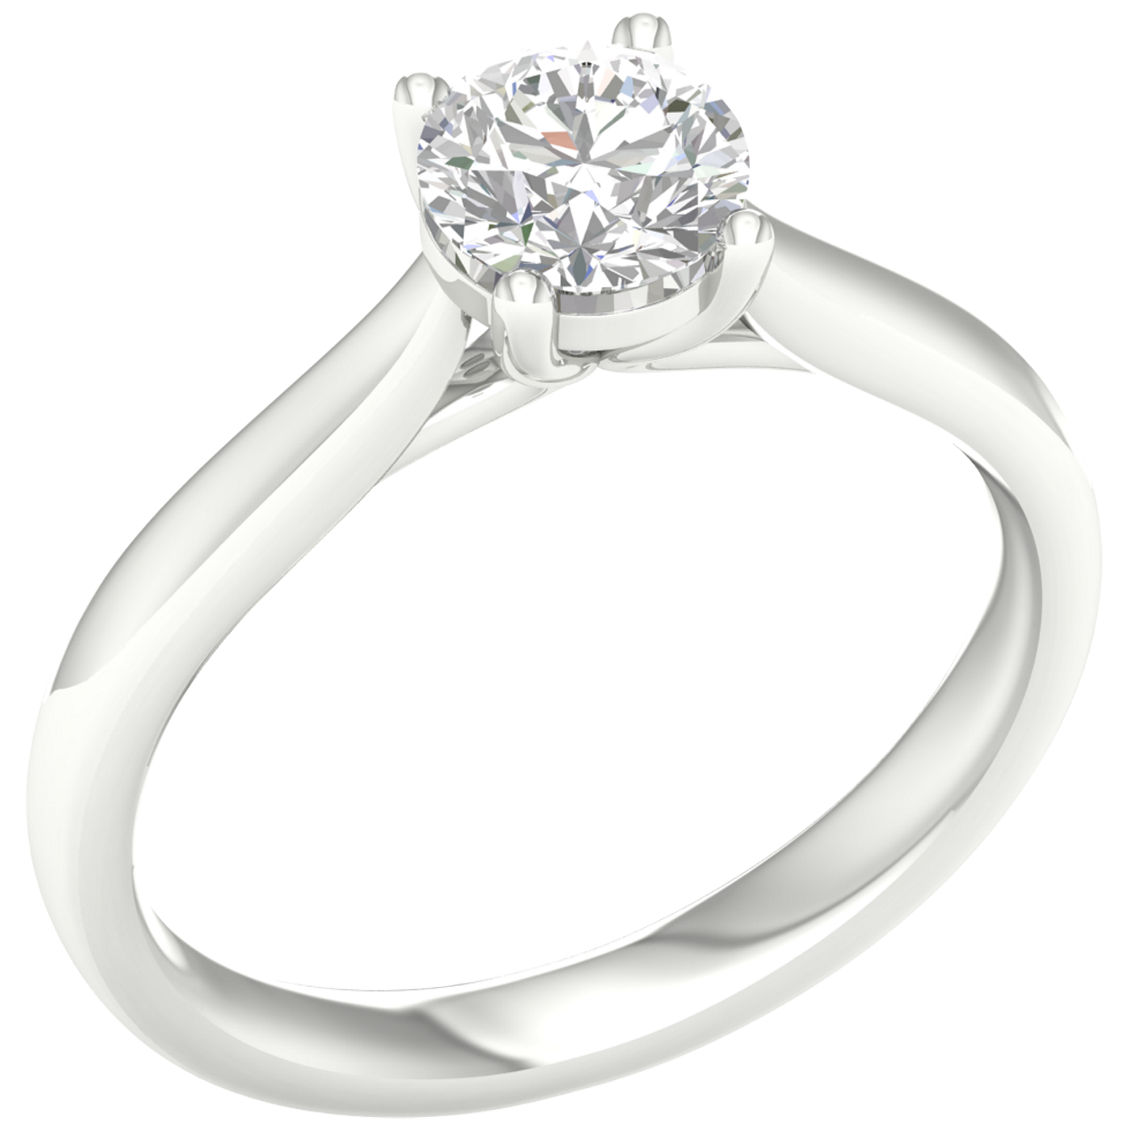 Pure Brilliance 14K White Gold 1 CTW Round Solitaire Ring with IGI Certification - Image 2 of 2